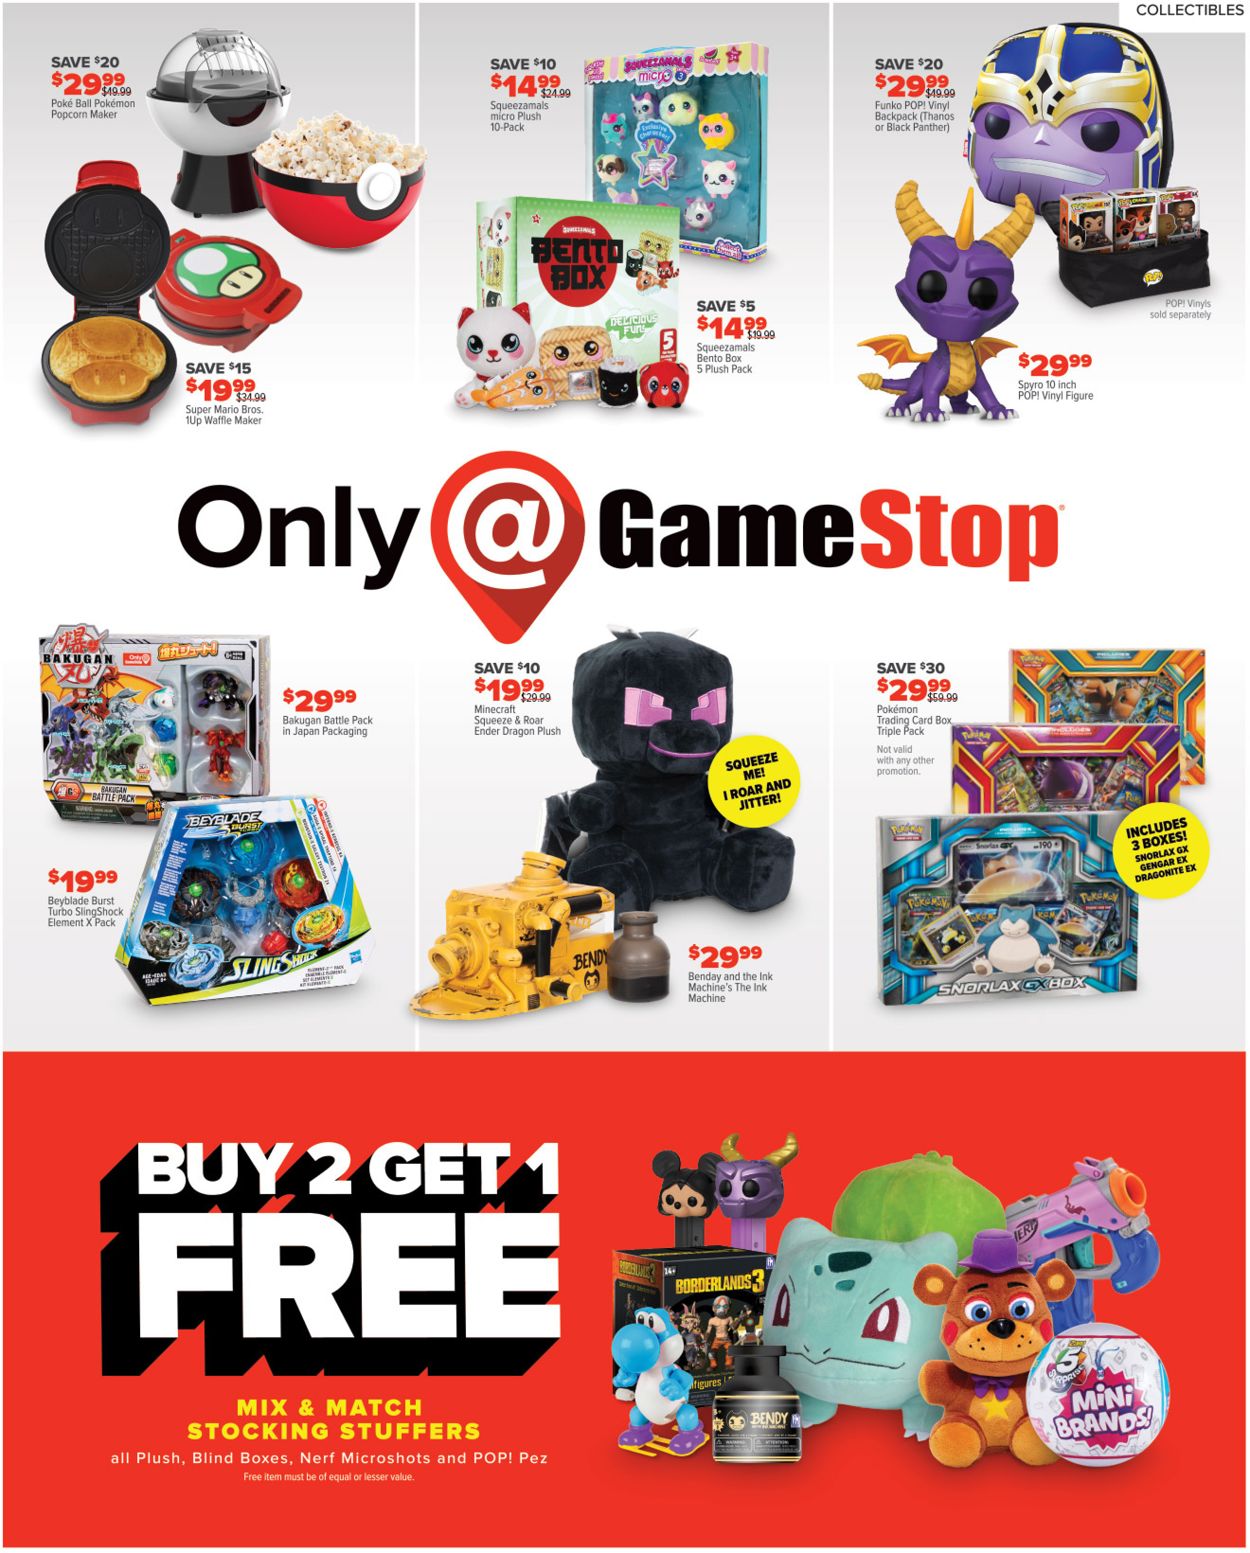 Catalogue Game Stop - BLACK FRIDAY SALE 2019 from 11/28/2019